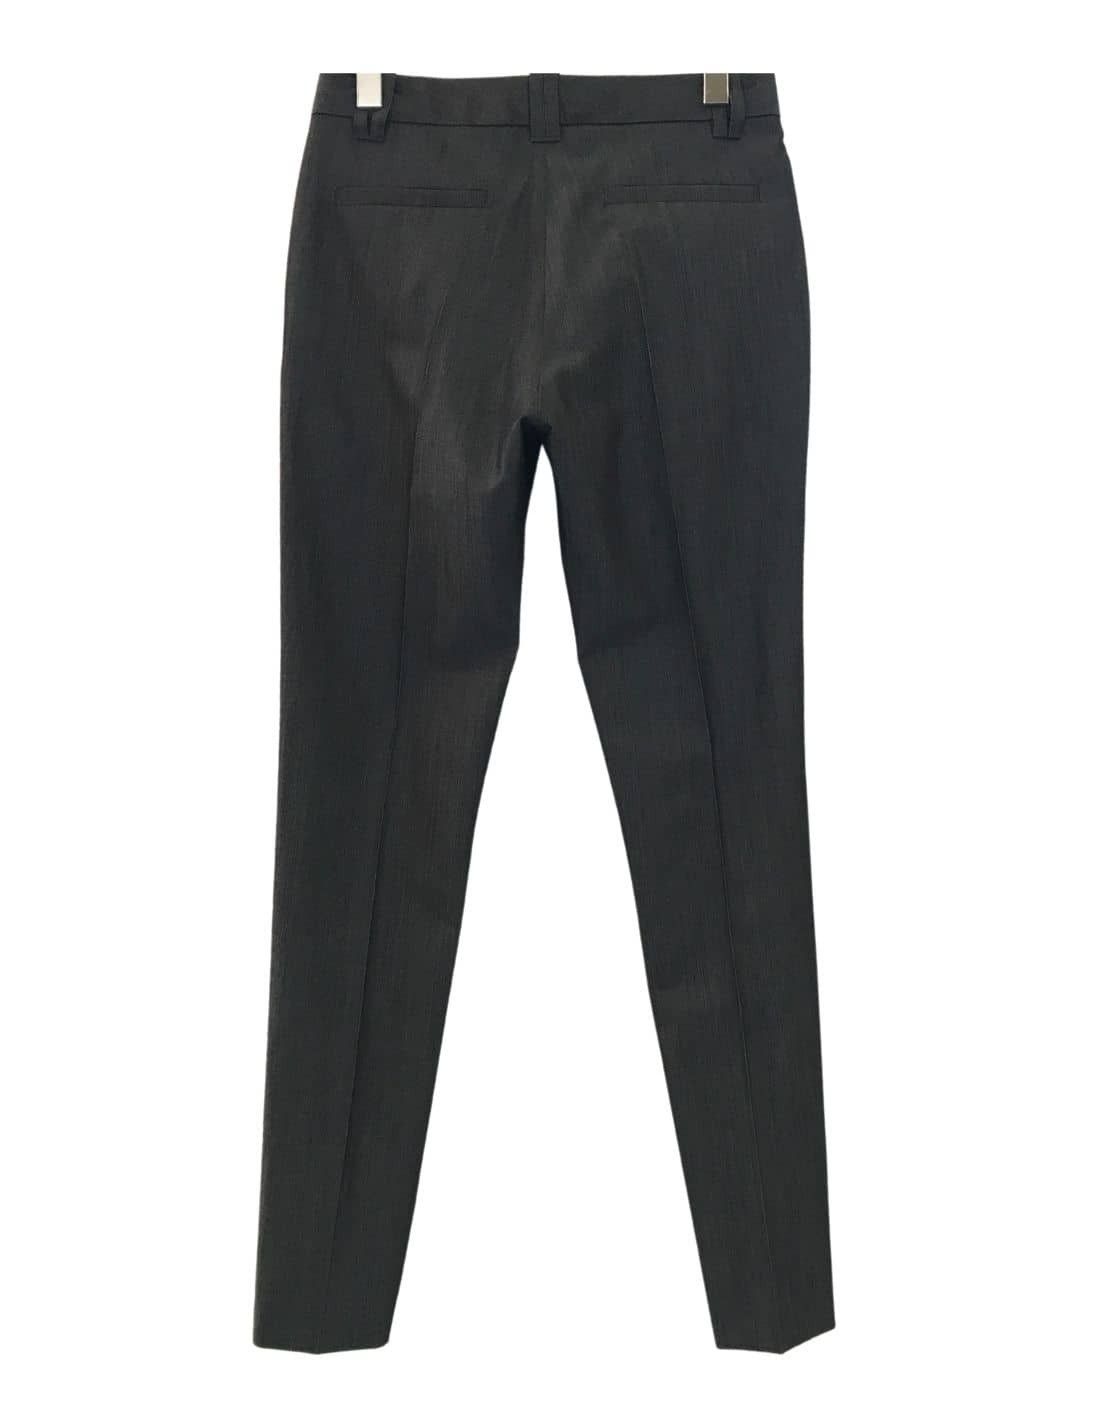 Grey pleated cigarette pants BARBARA BUI for women - SS21